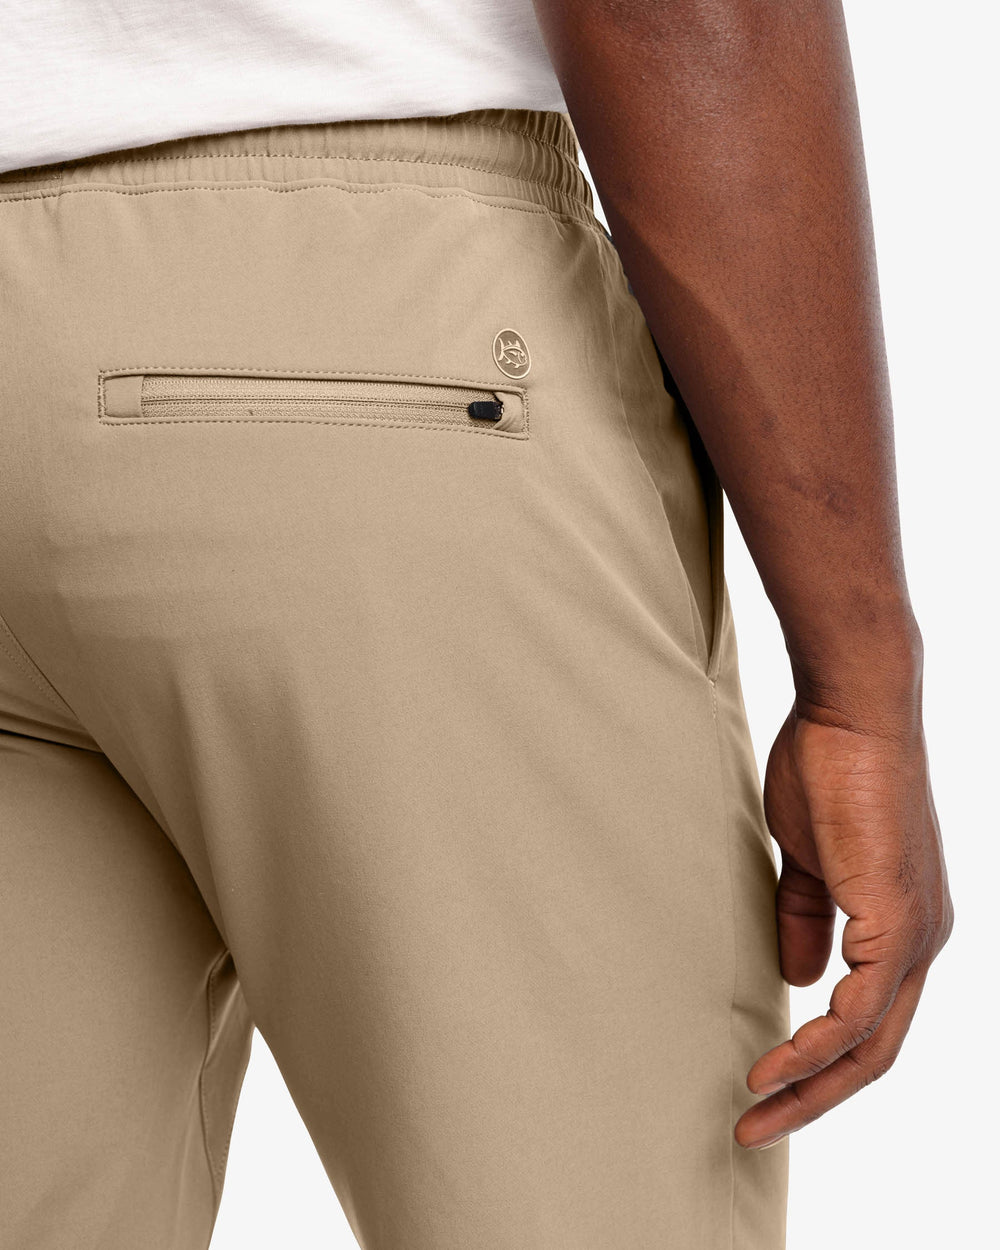 The detail view of the Southern Tide The Excursion Performance Jogger by Southern Tide - Sandstone Khaki